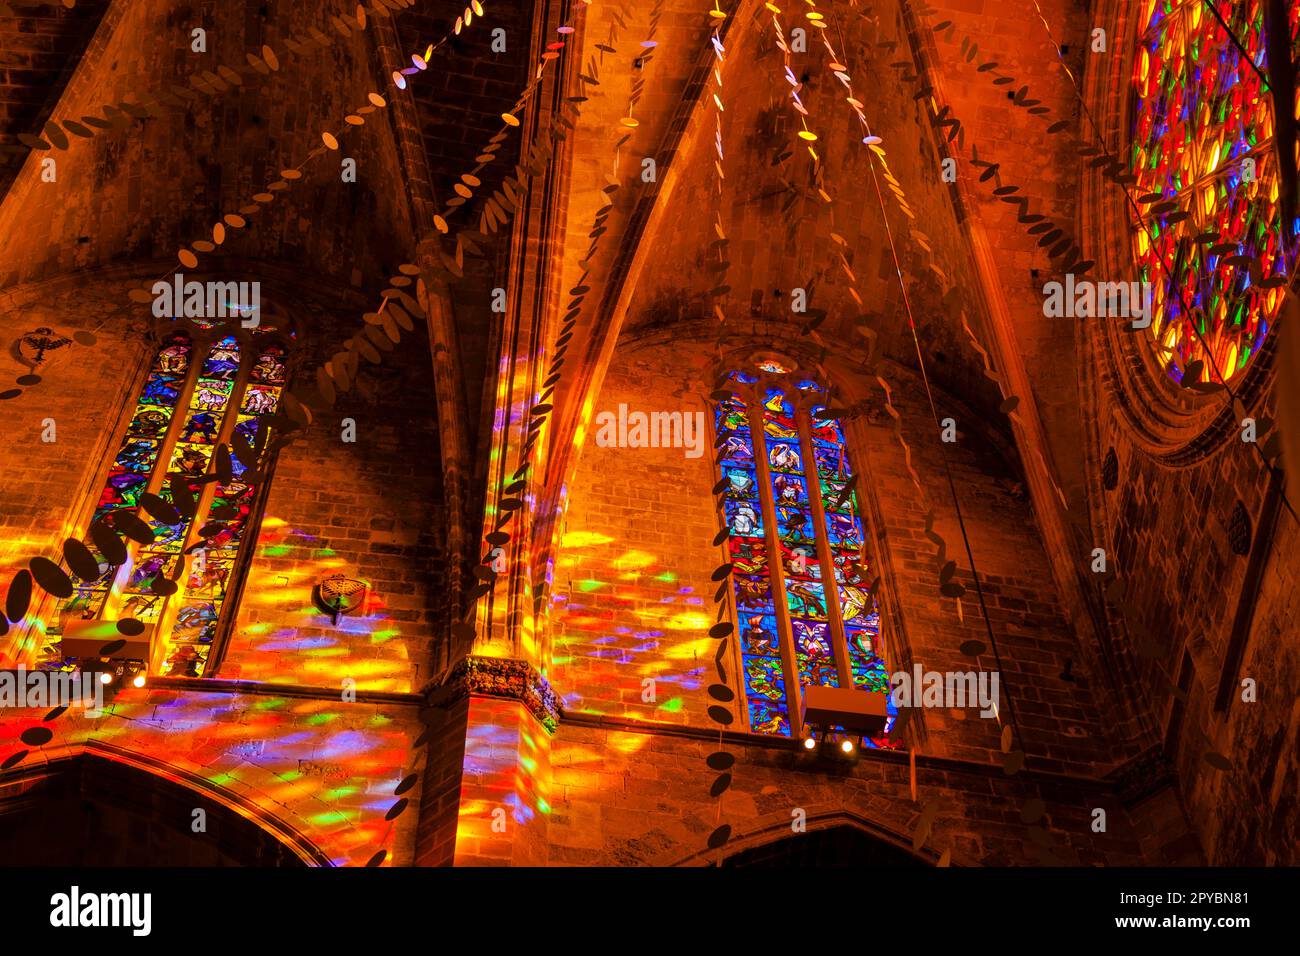 light games provoked by the major roseton, Cathedral of Mallorca , 13th century, Historical-artistic monument, Palma, mallorca, balearic islands, spai Stock Photo